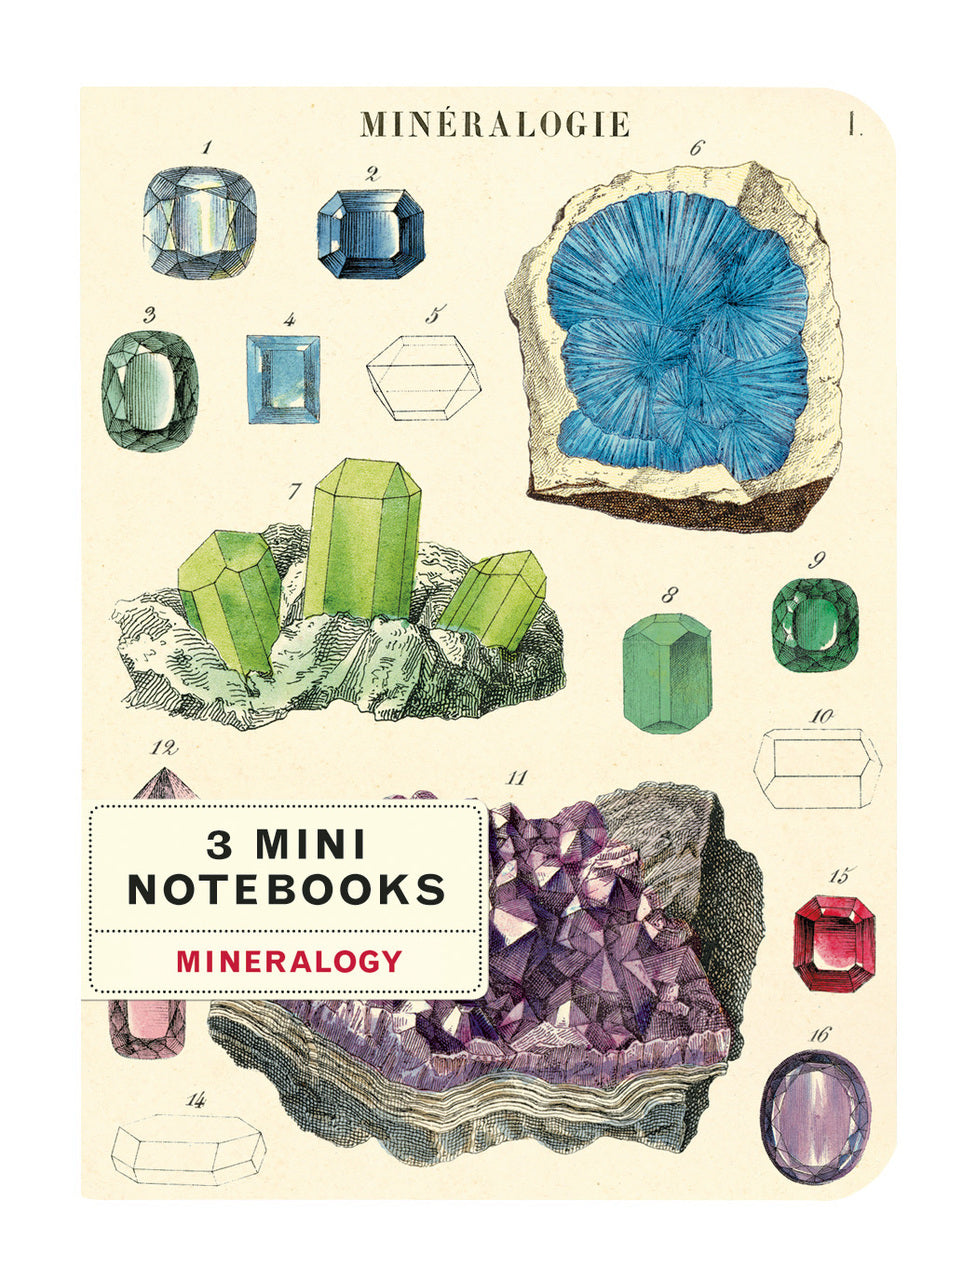  Each of the three notebooks features beautiful gems, crystals, and minerals. 